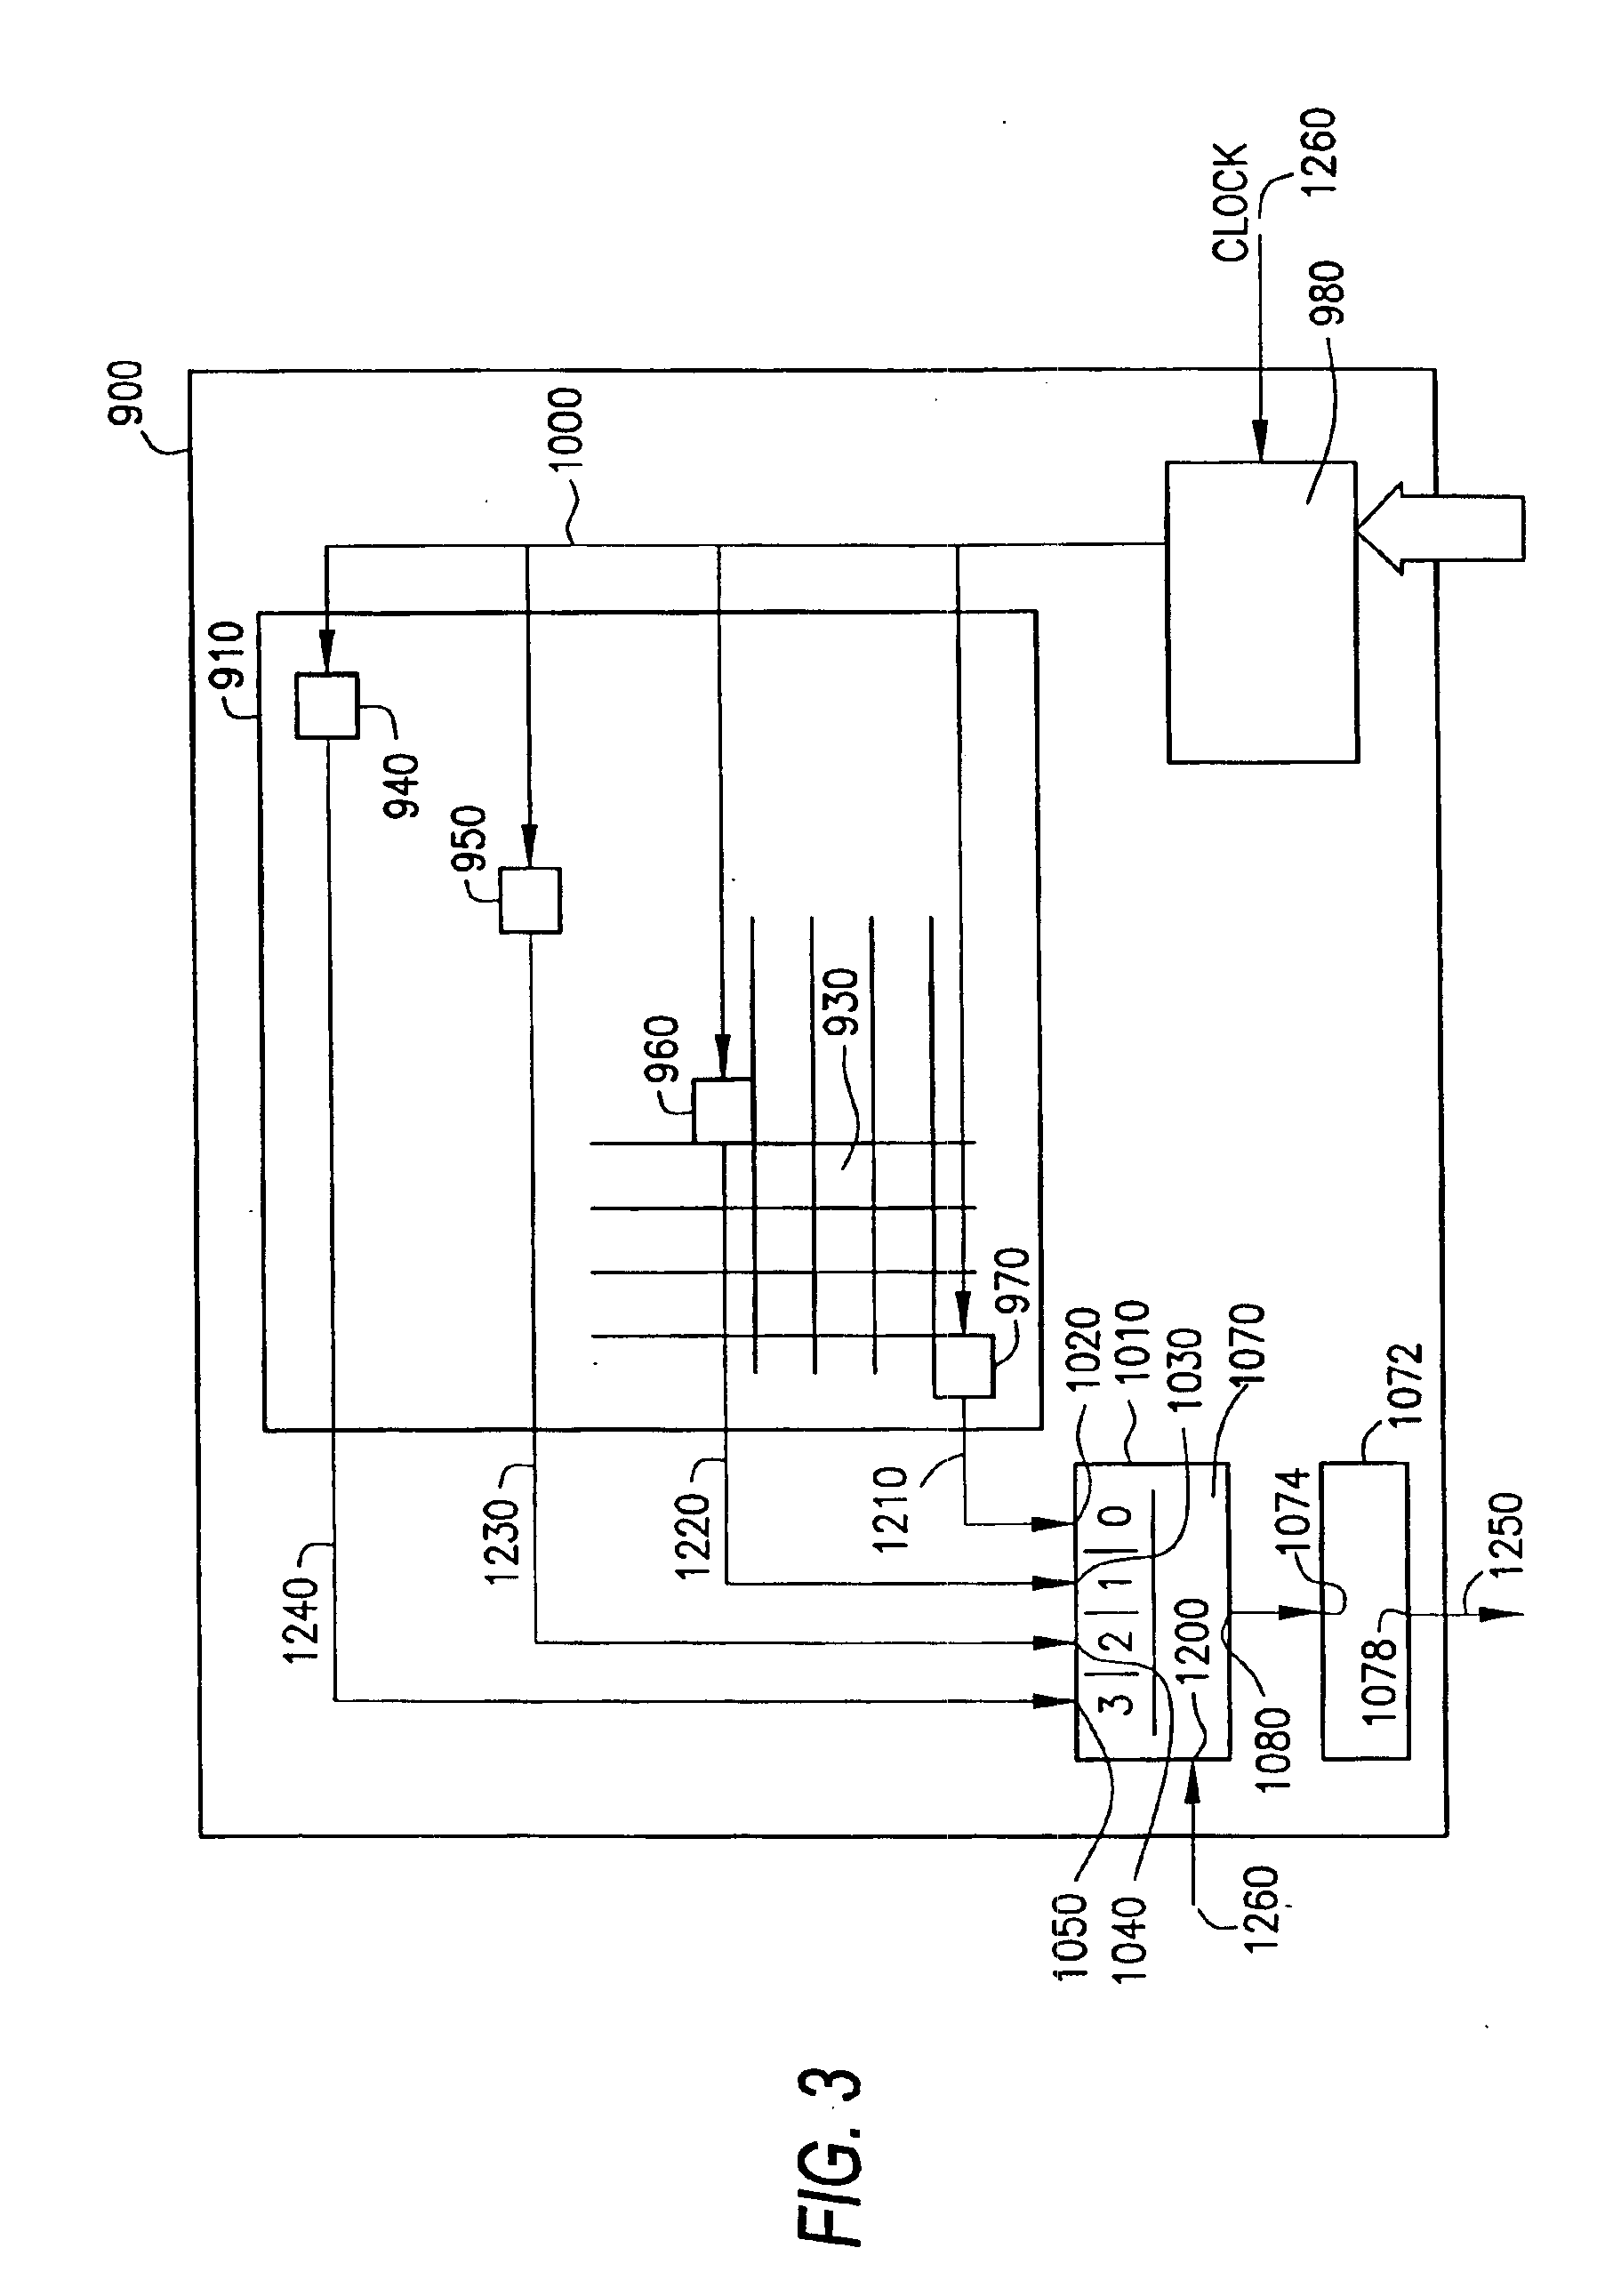 System and method for operating a memory array